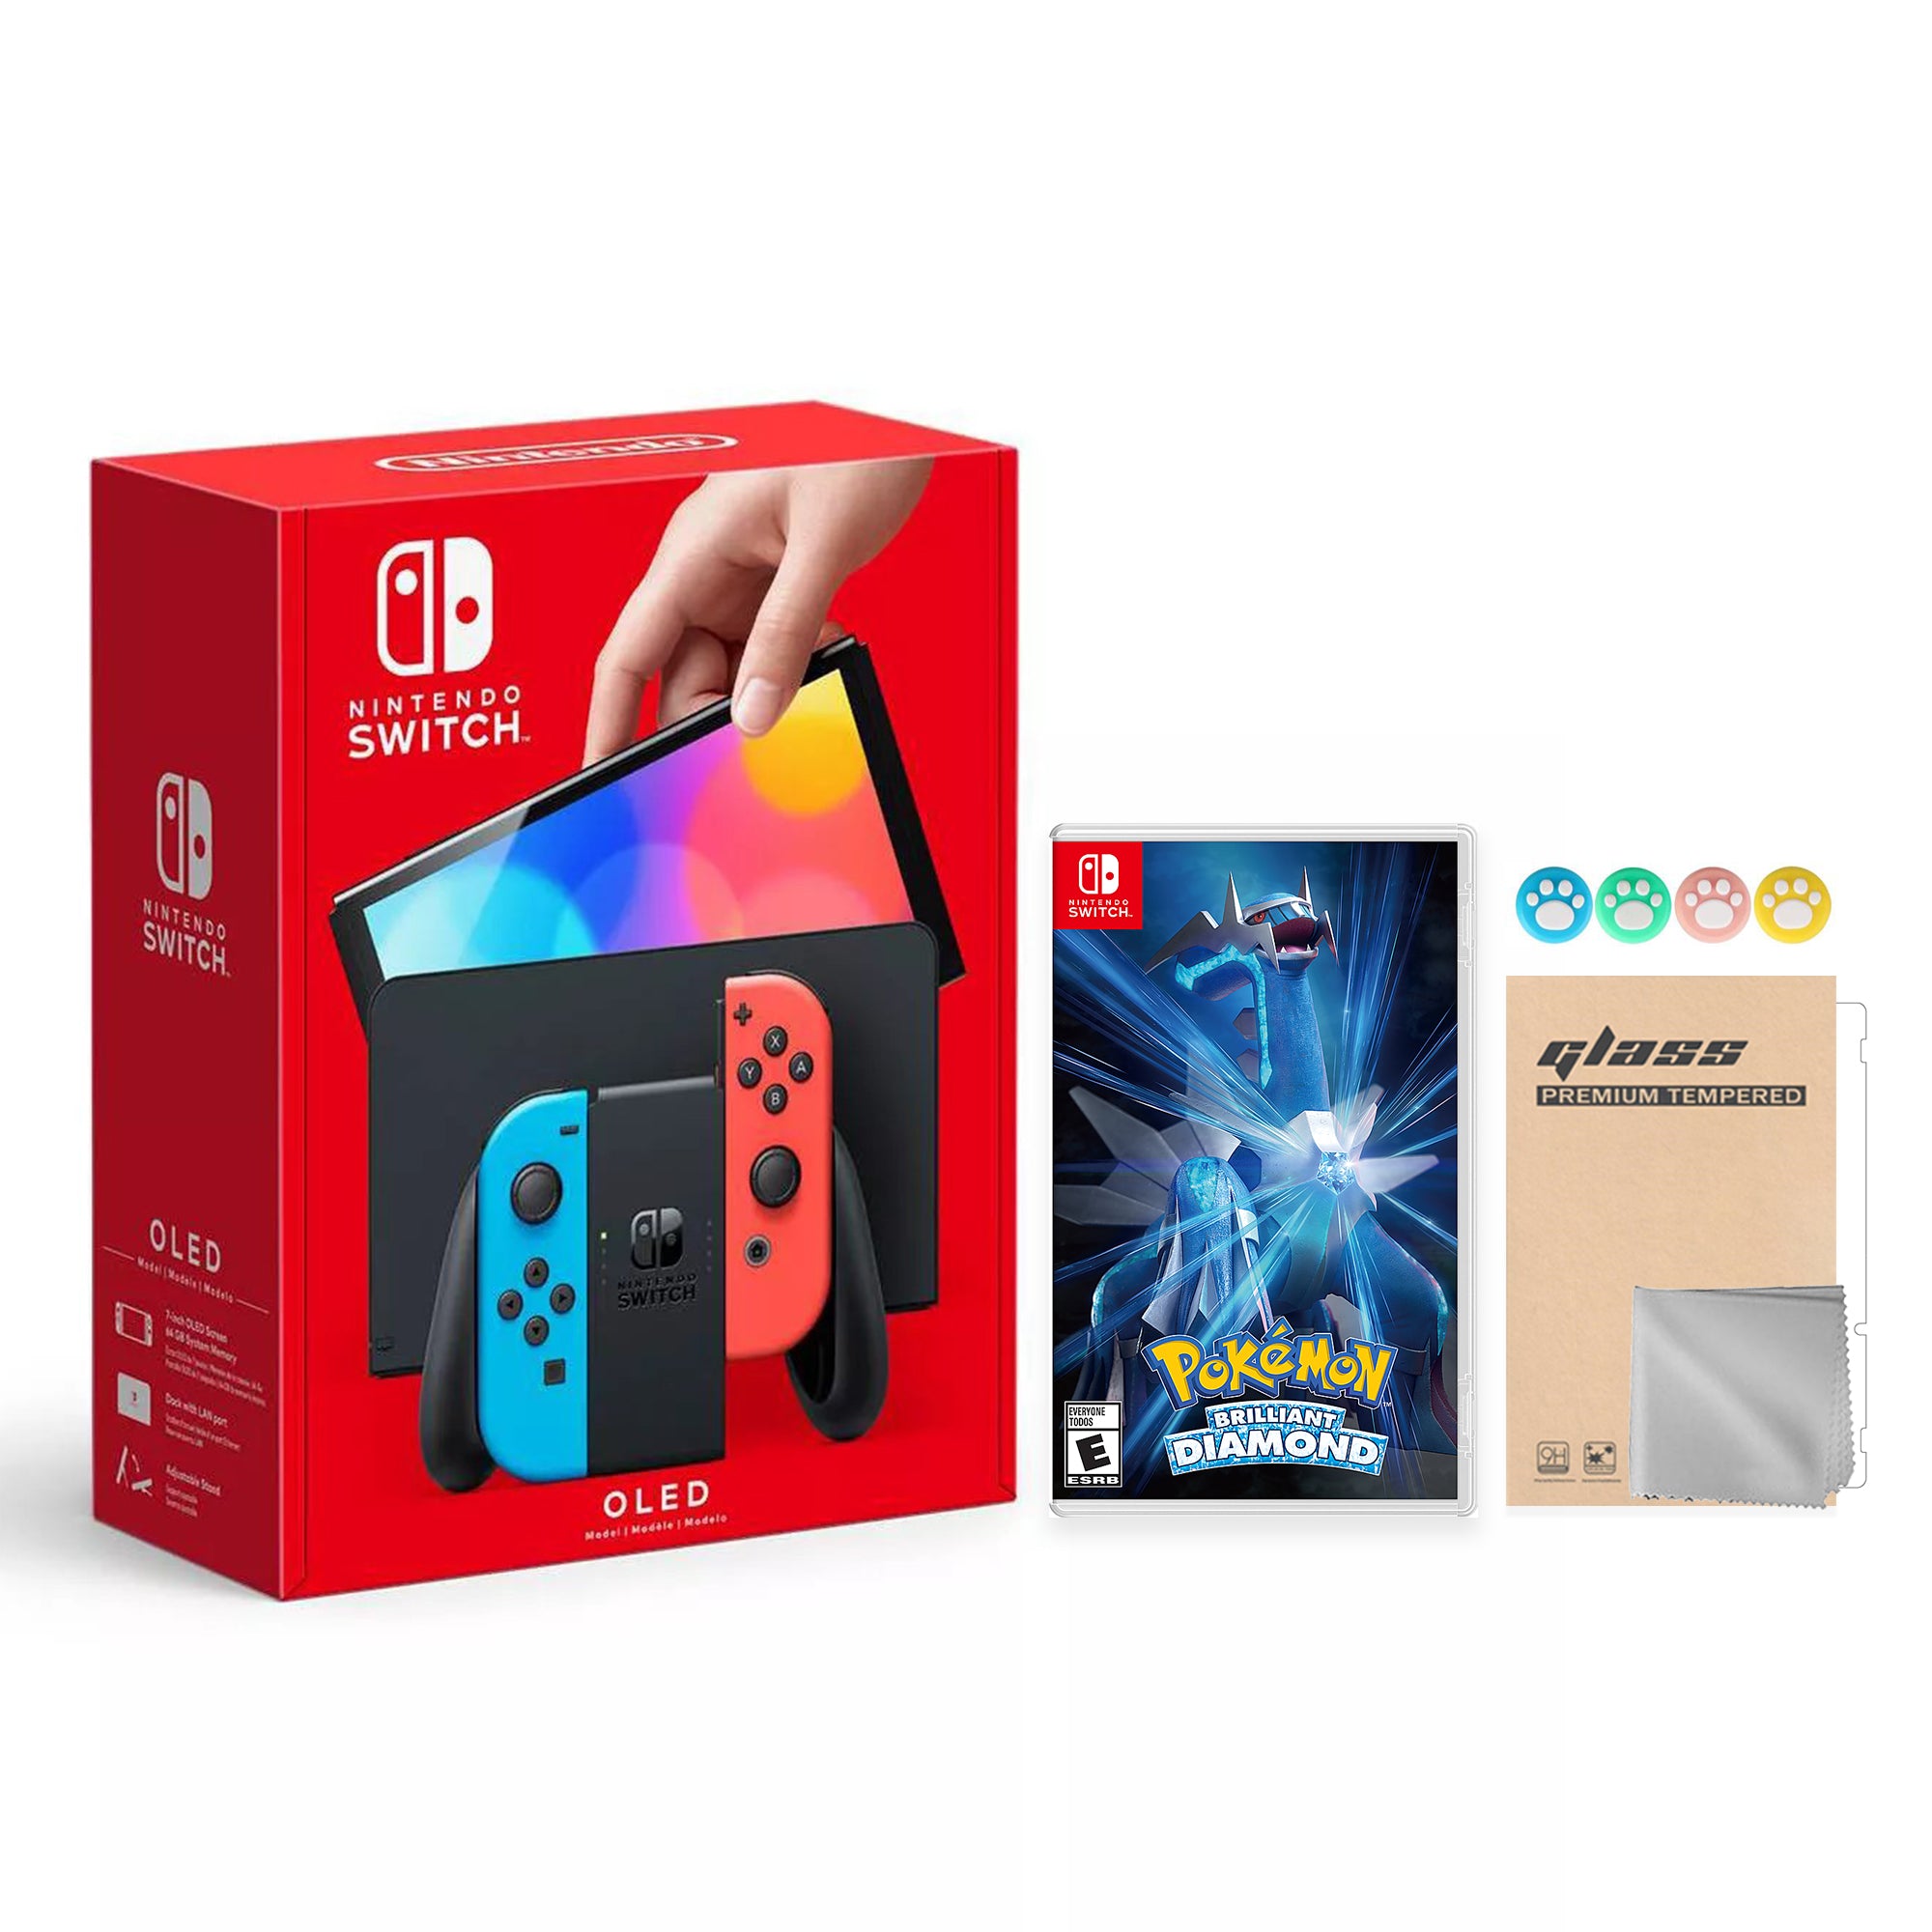 2022 New Nintendo Switch OLED Model Neon Red Blue Joy Con 64GB Console Improved HD Screen & LAN-Port Dock with Pokemon Brilliant Diamond, Mytrix Joystick Caps & Screen Protector